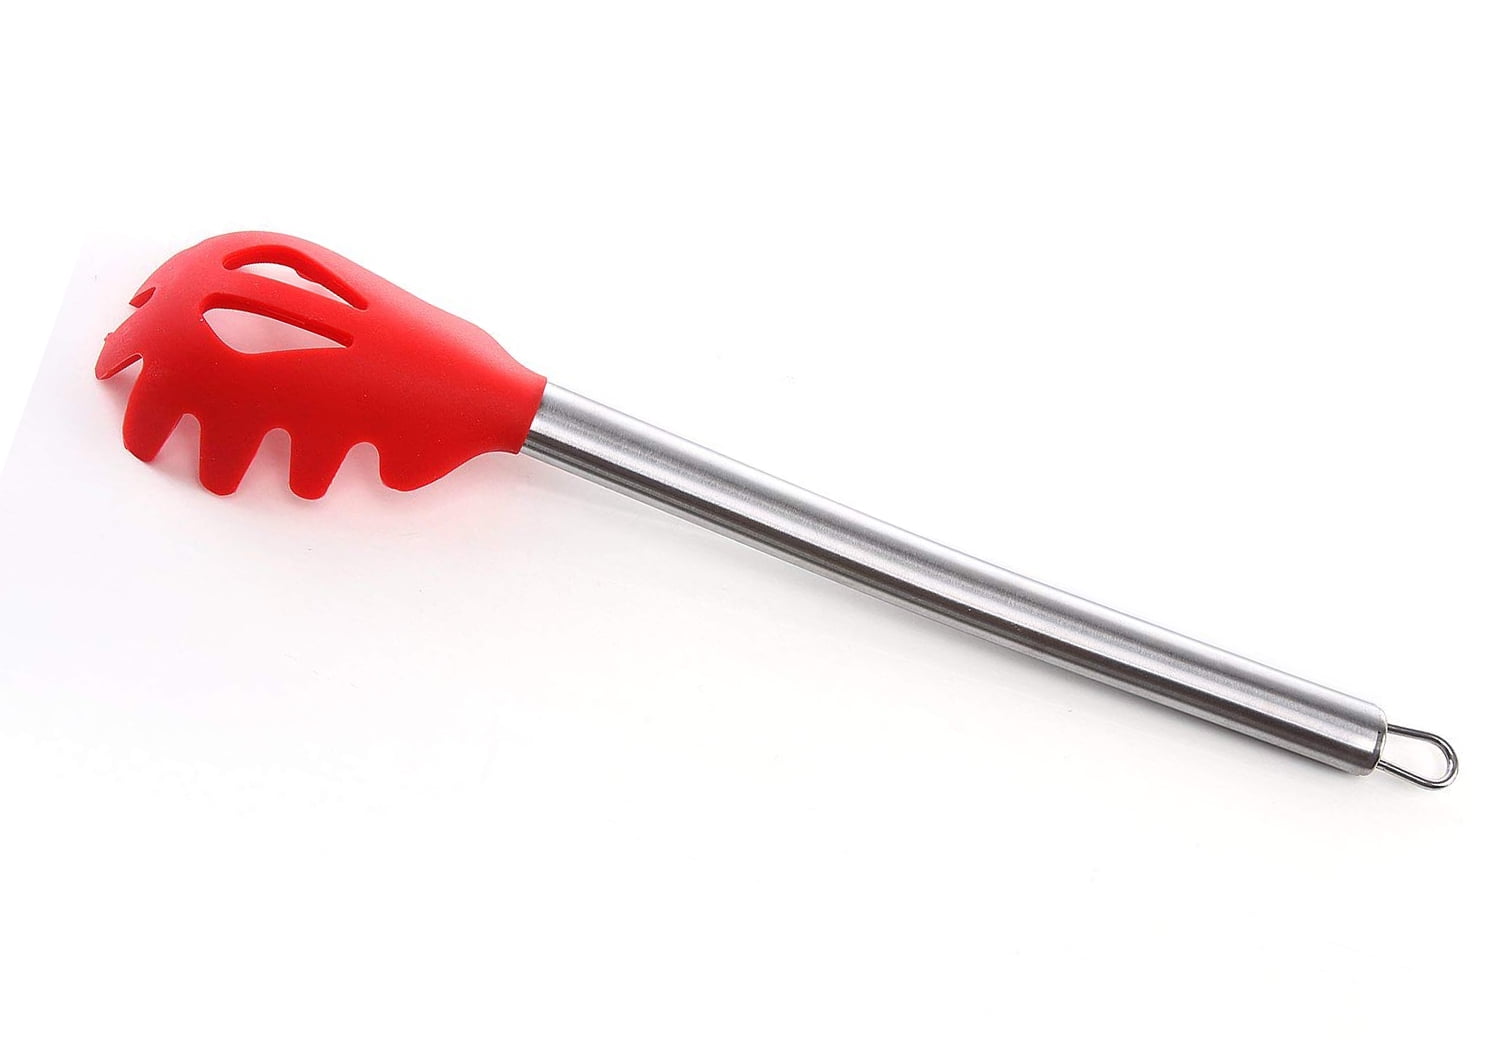 TOOGOO With Strong Silicone Covering Head And Stay-cool Stainless Steel Handle Red R Silicone Pasta fork silver 